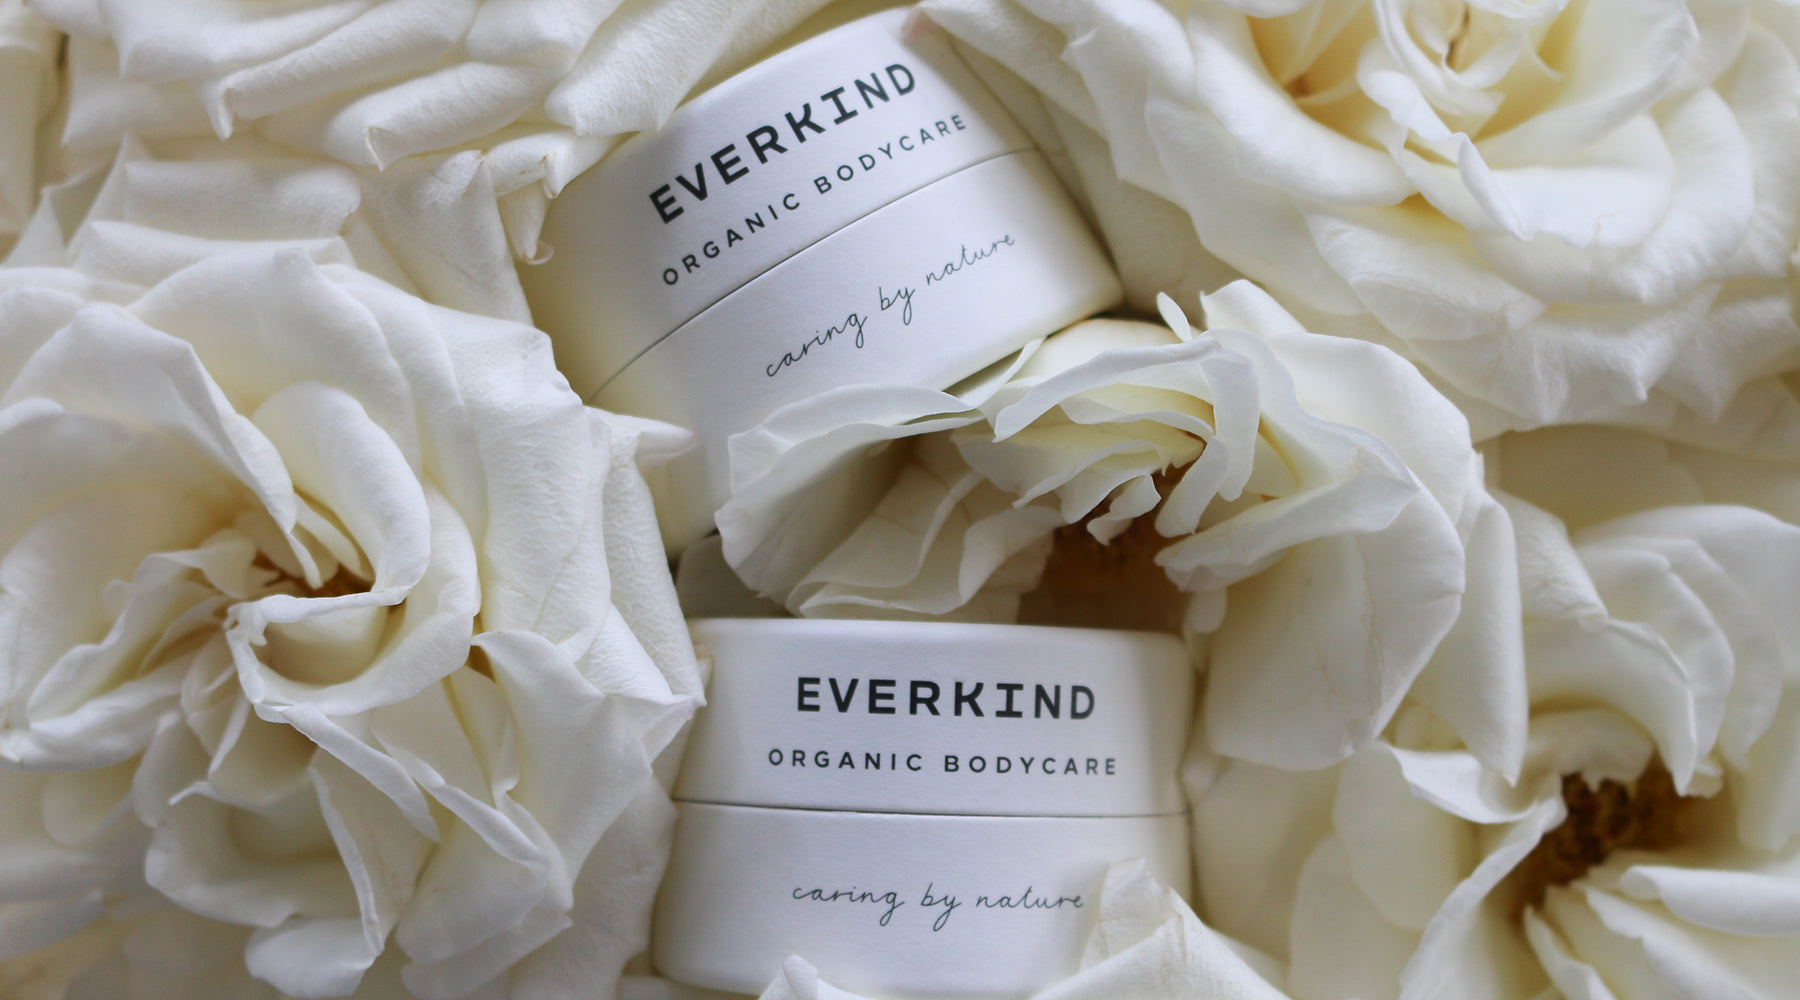 Photo of Everkind's new home compostable jars surrounded by beautiful white roses.